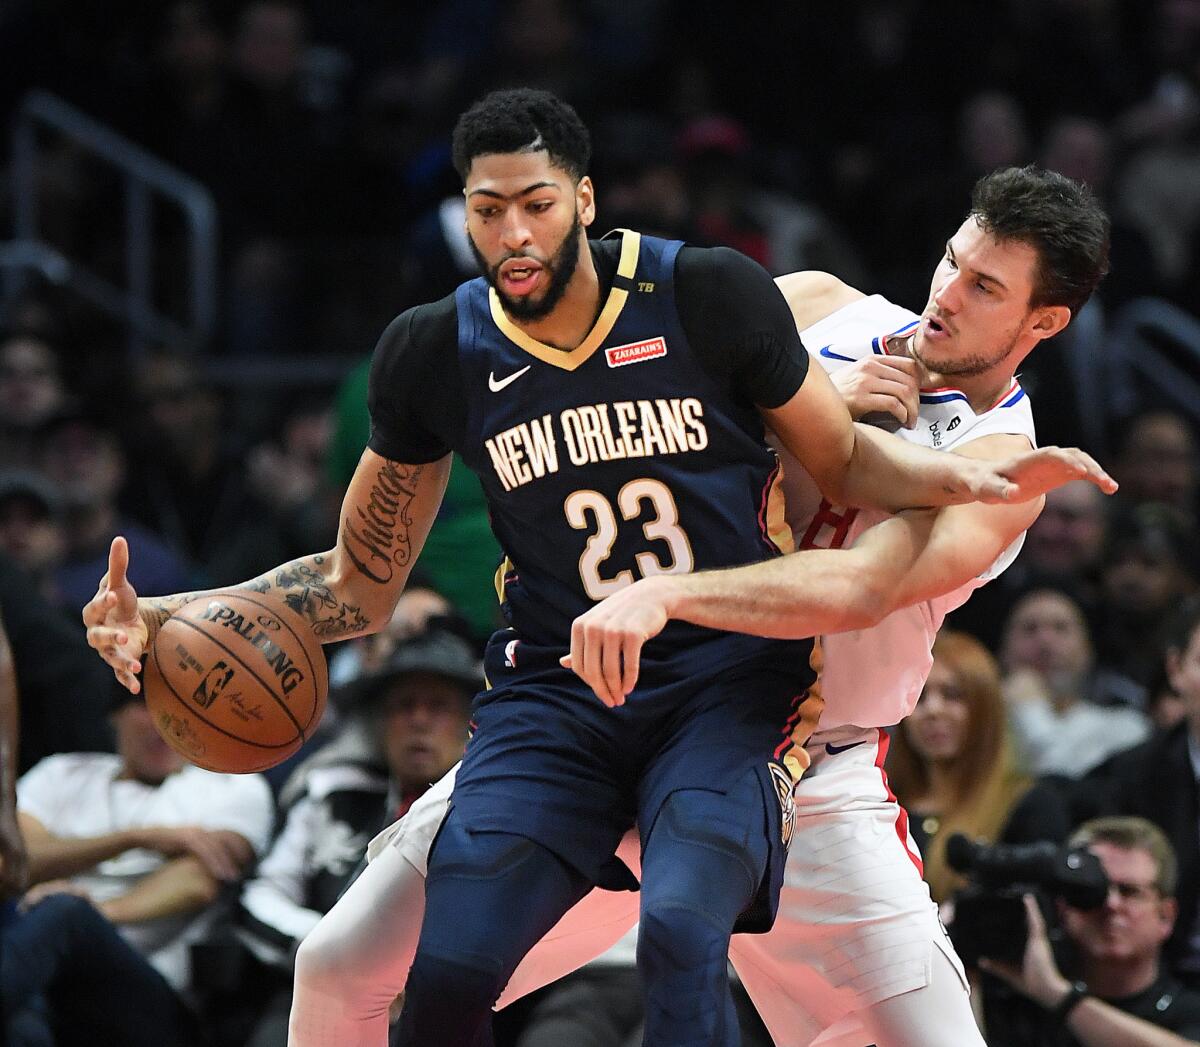 Clippers forward Danilo Gallinari, disrupting a drive by Pelicans All-Star Anthony Davis, is an underrated defensive player.